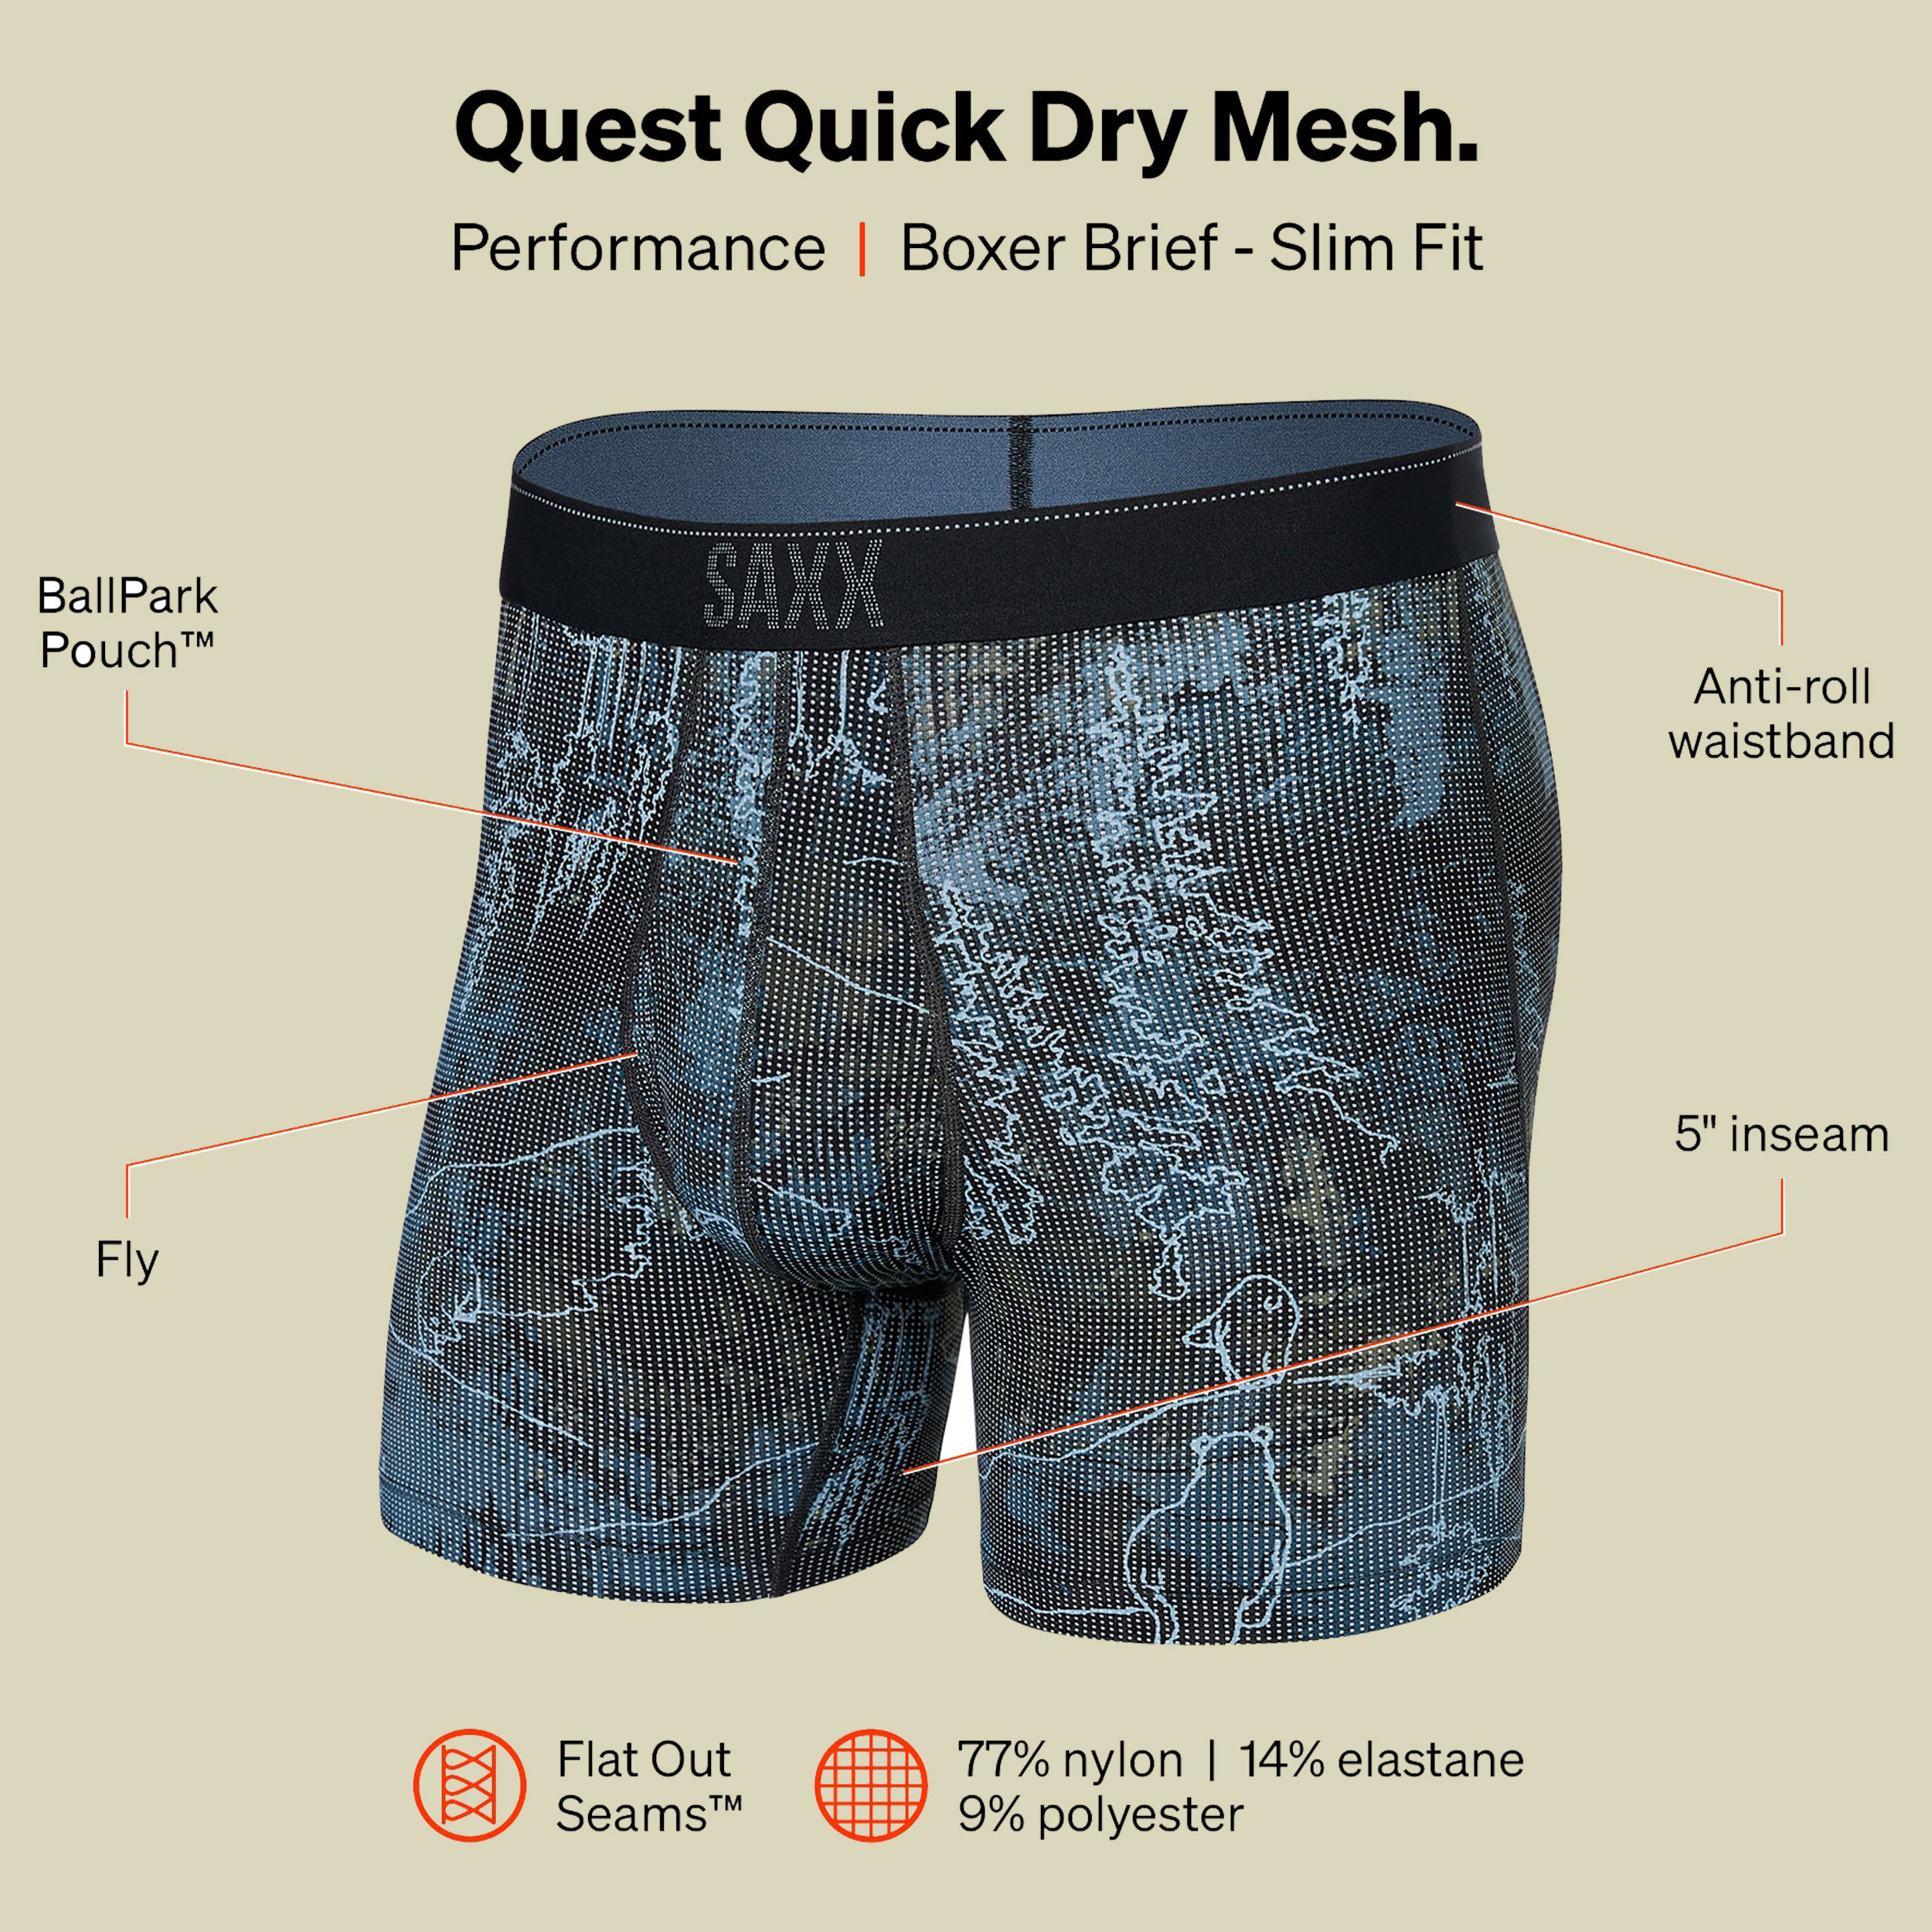 Quest Quick Dry Mesh Boxer Brief Fly Größe S Farbe smokey mountains-multi